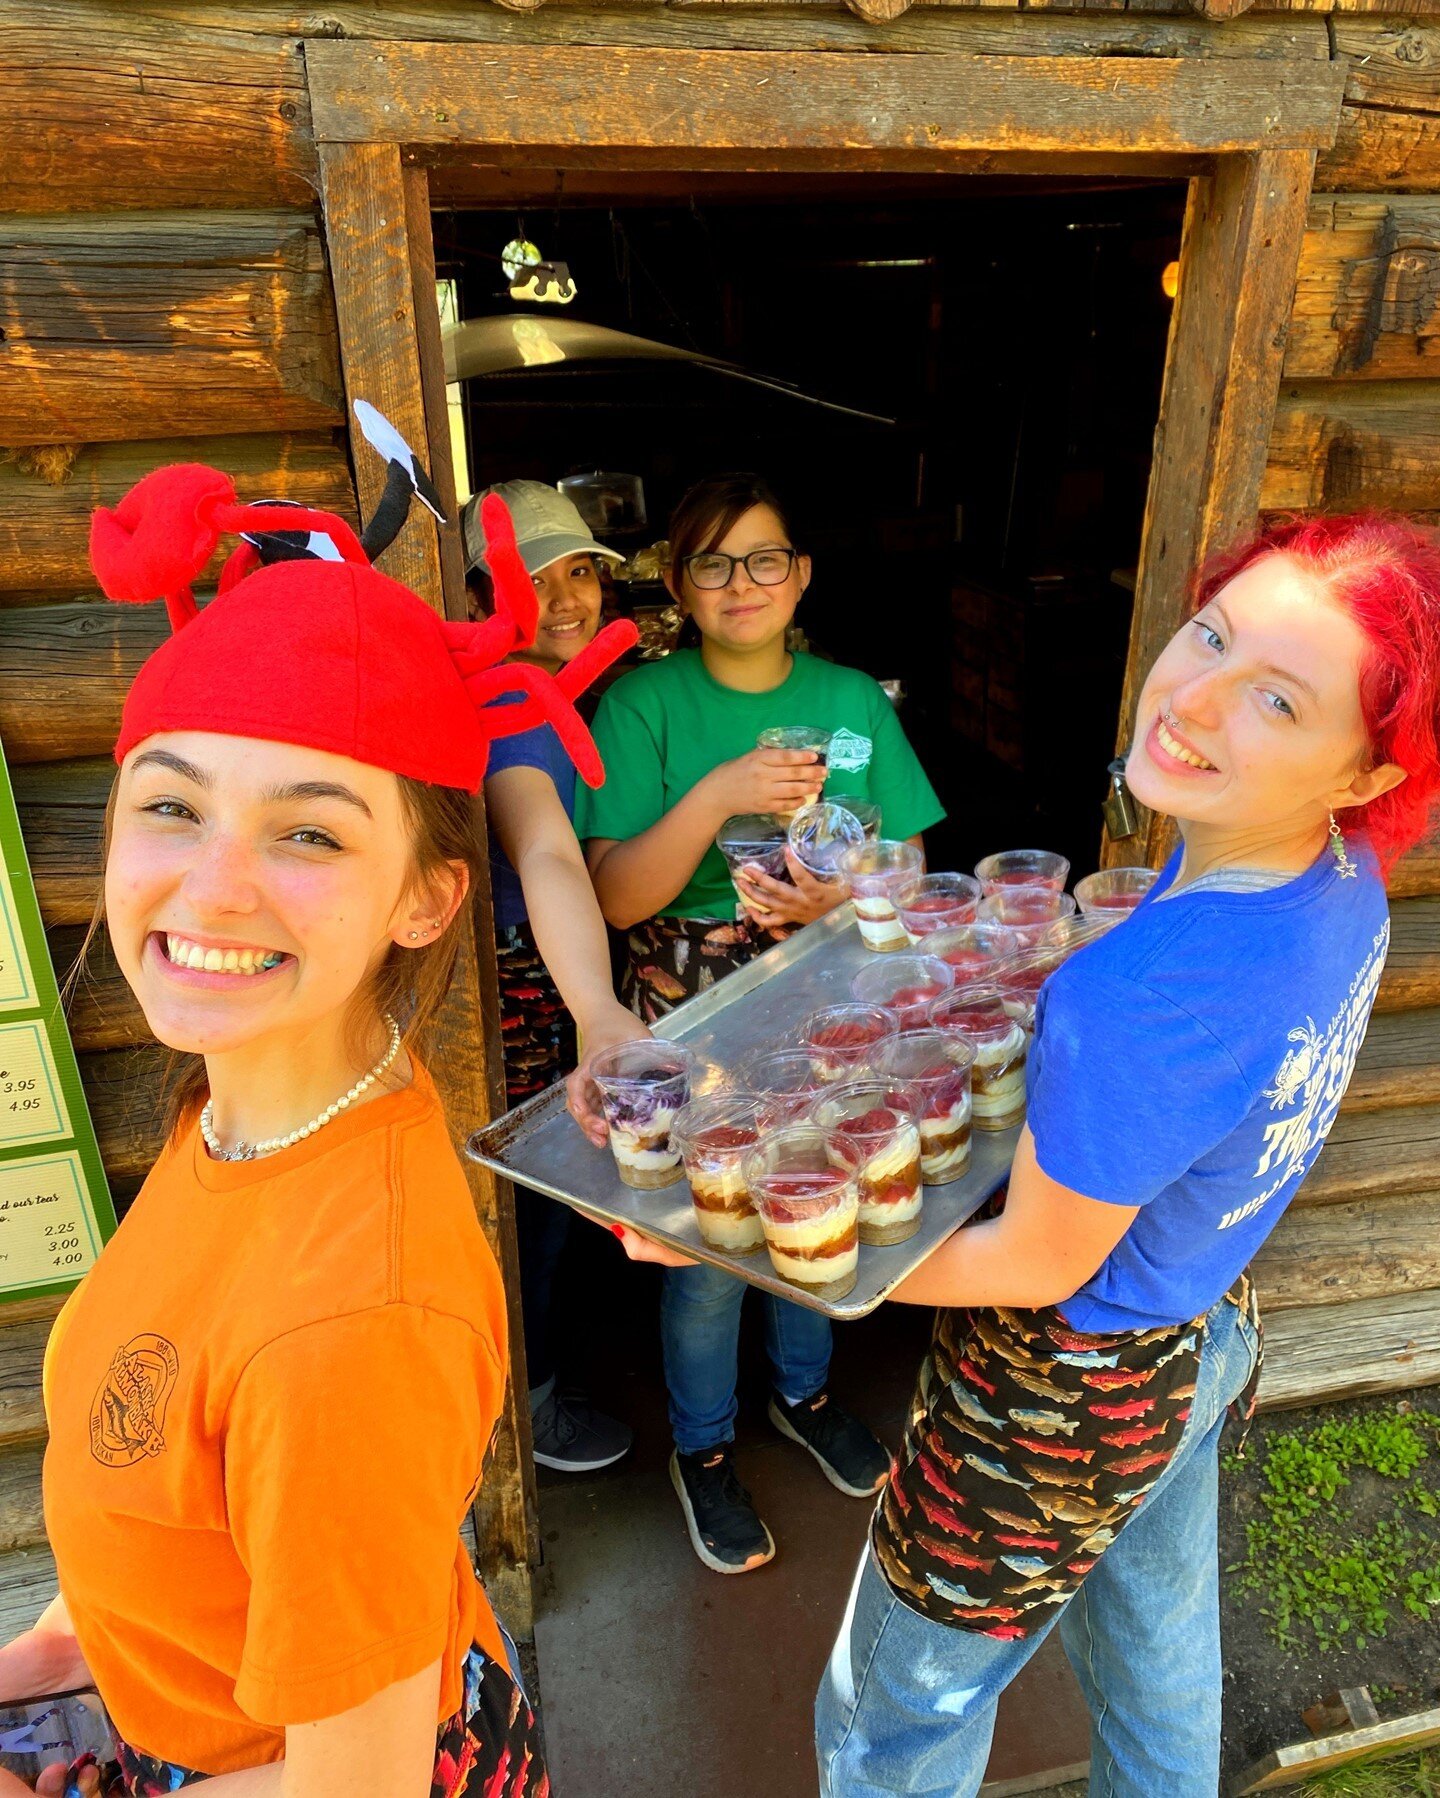 Meet Riley, Hannah, Emma &amp; Catherine - four very valuable members of our spectacular Salmon Bake team.  Thanks for making &quot;work&quot; so much easier and so much fun ladies!

Alaska Women.
Alaska Strong.
Alaska Salmon Bake.

#alaskasalmonbake